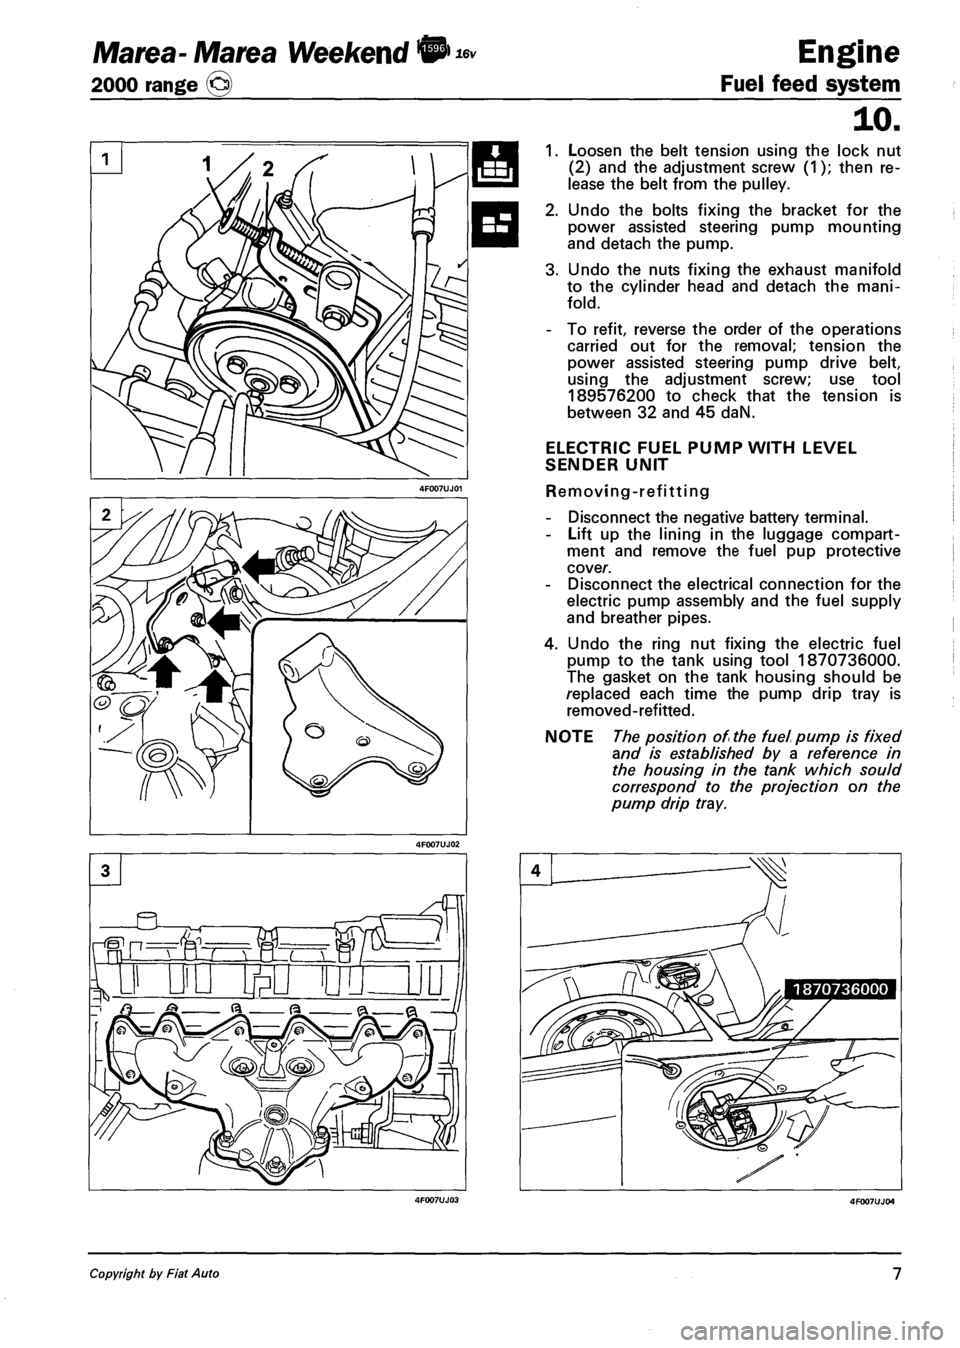 FIAT MAREA 2001 1.G Manual PDF Marea- Marea Weekend • 
2000 range © 
16v Engine 
Fuel feed system 
10. 
1. Loosen the belt tension using the lock nut 
(2) and the adjustment screw (1); then re­
lease the belt from the pulley. 
